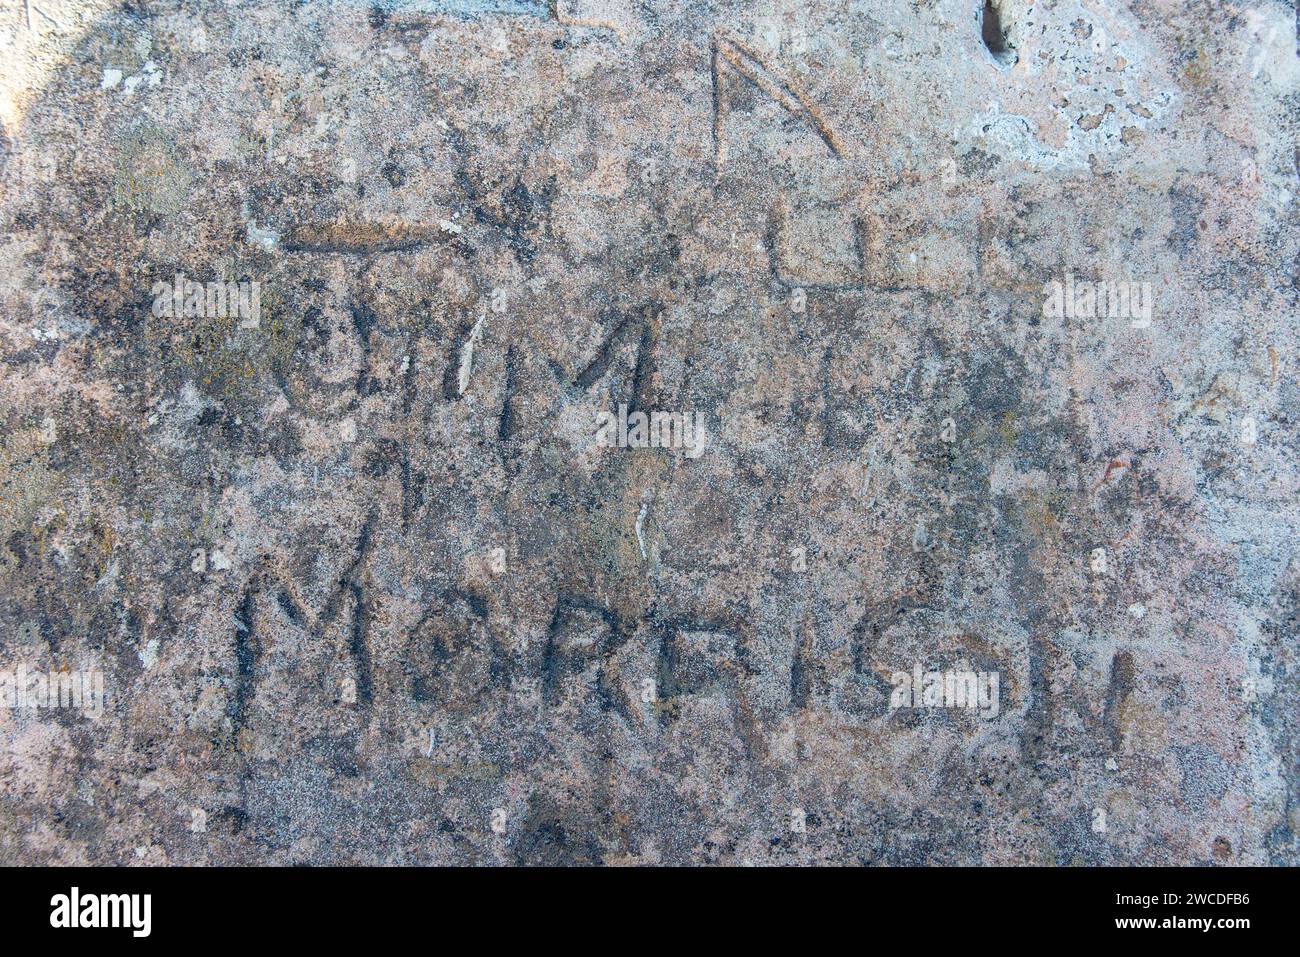 Jim Morrison's name engraved into an ancient wall in Malta Stock Photo